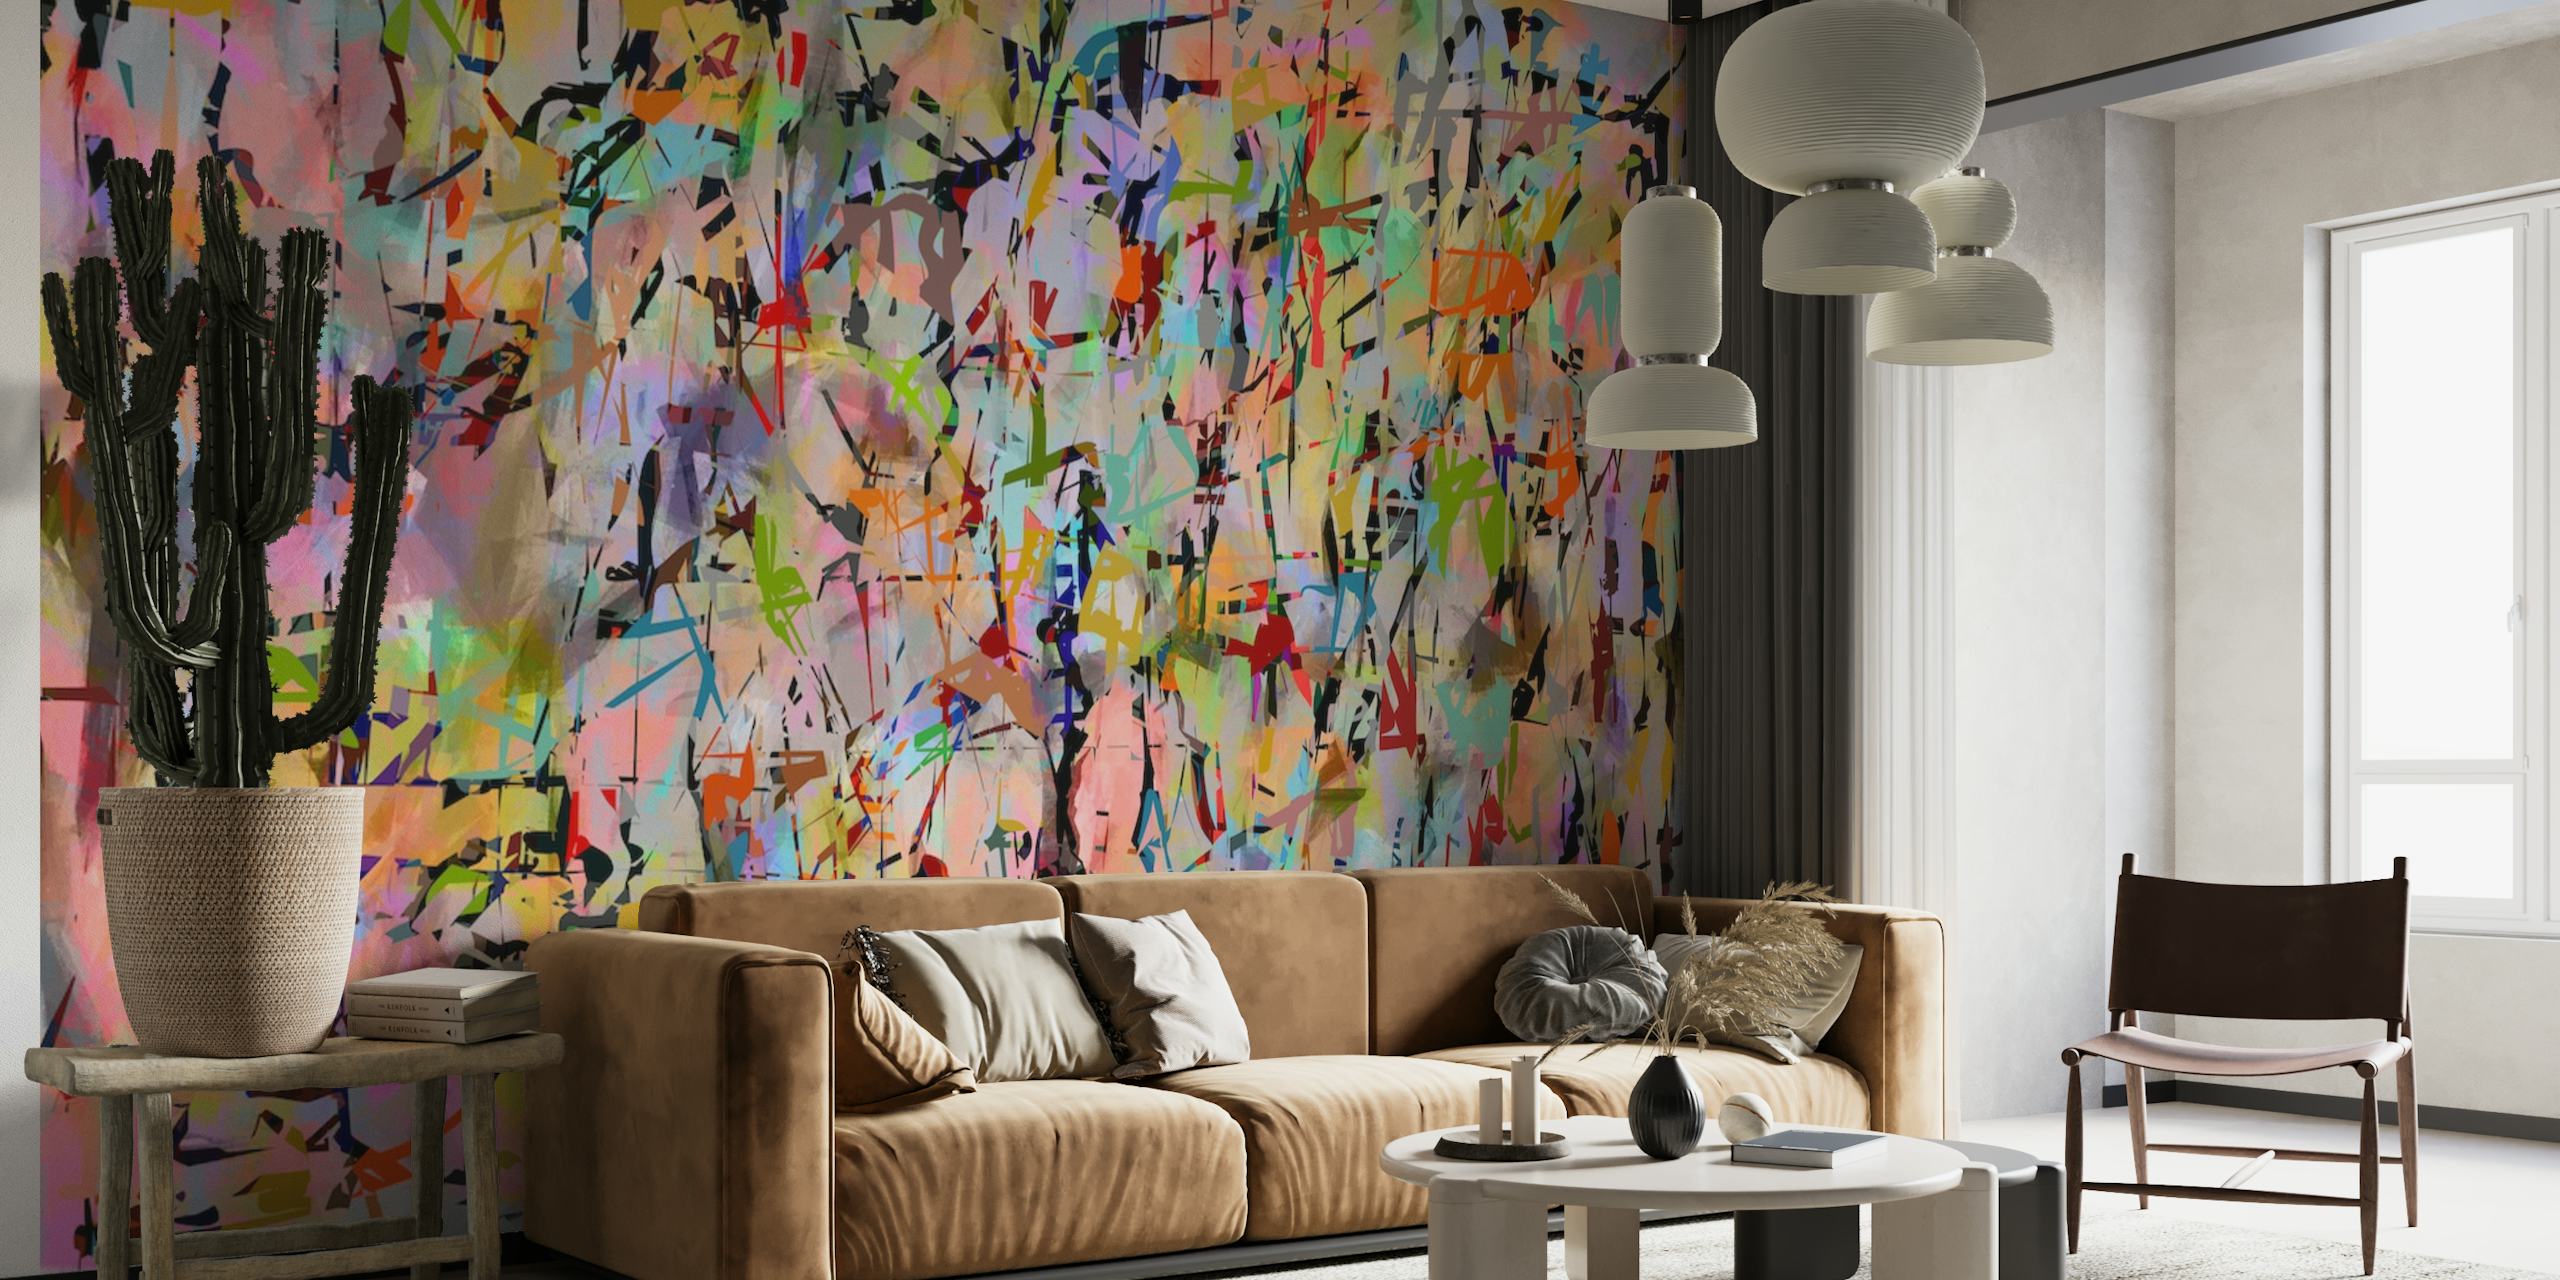 Abstract expressionist-inspired Pollock - Gateway 4In wall mural with vibrant splashes of color